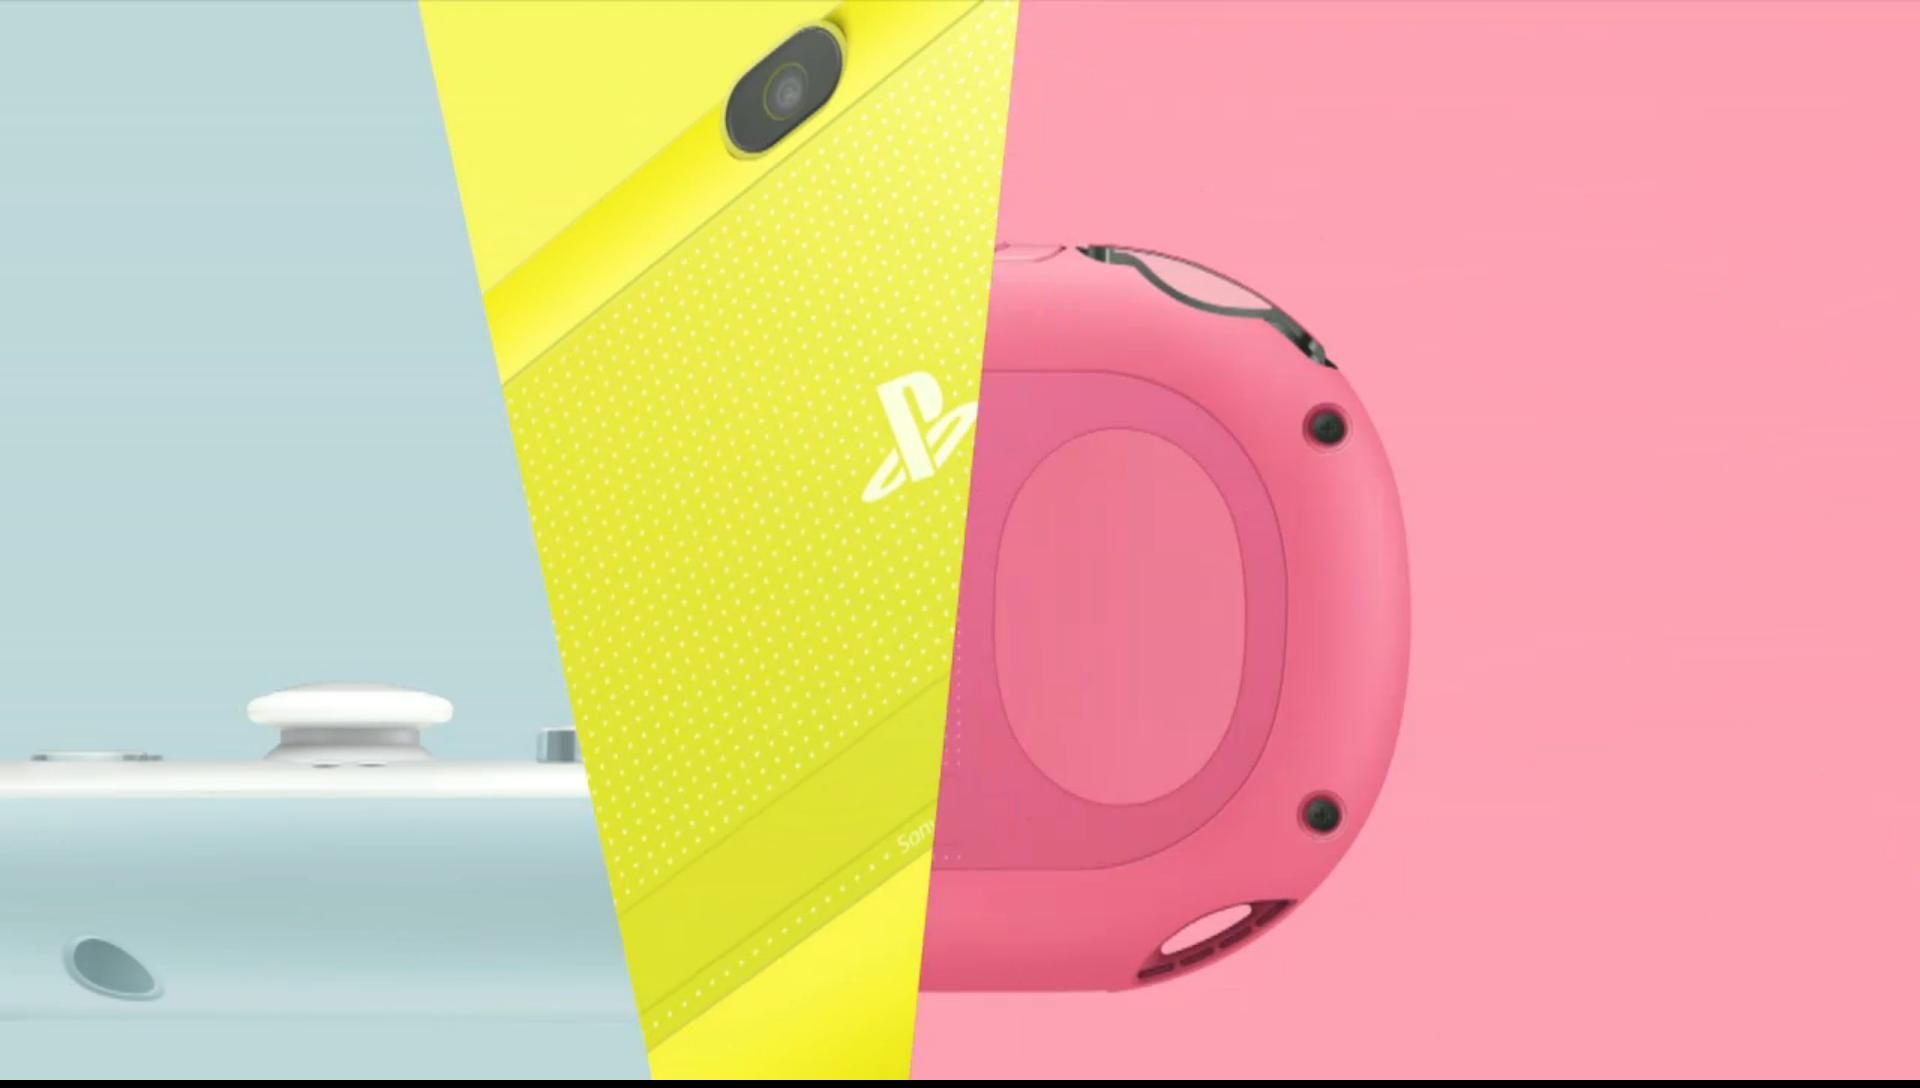 New Model for PS Vita Announced with Lots of Colors and a Trailer